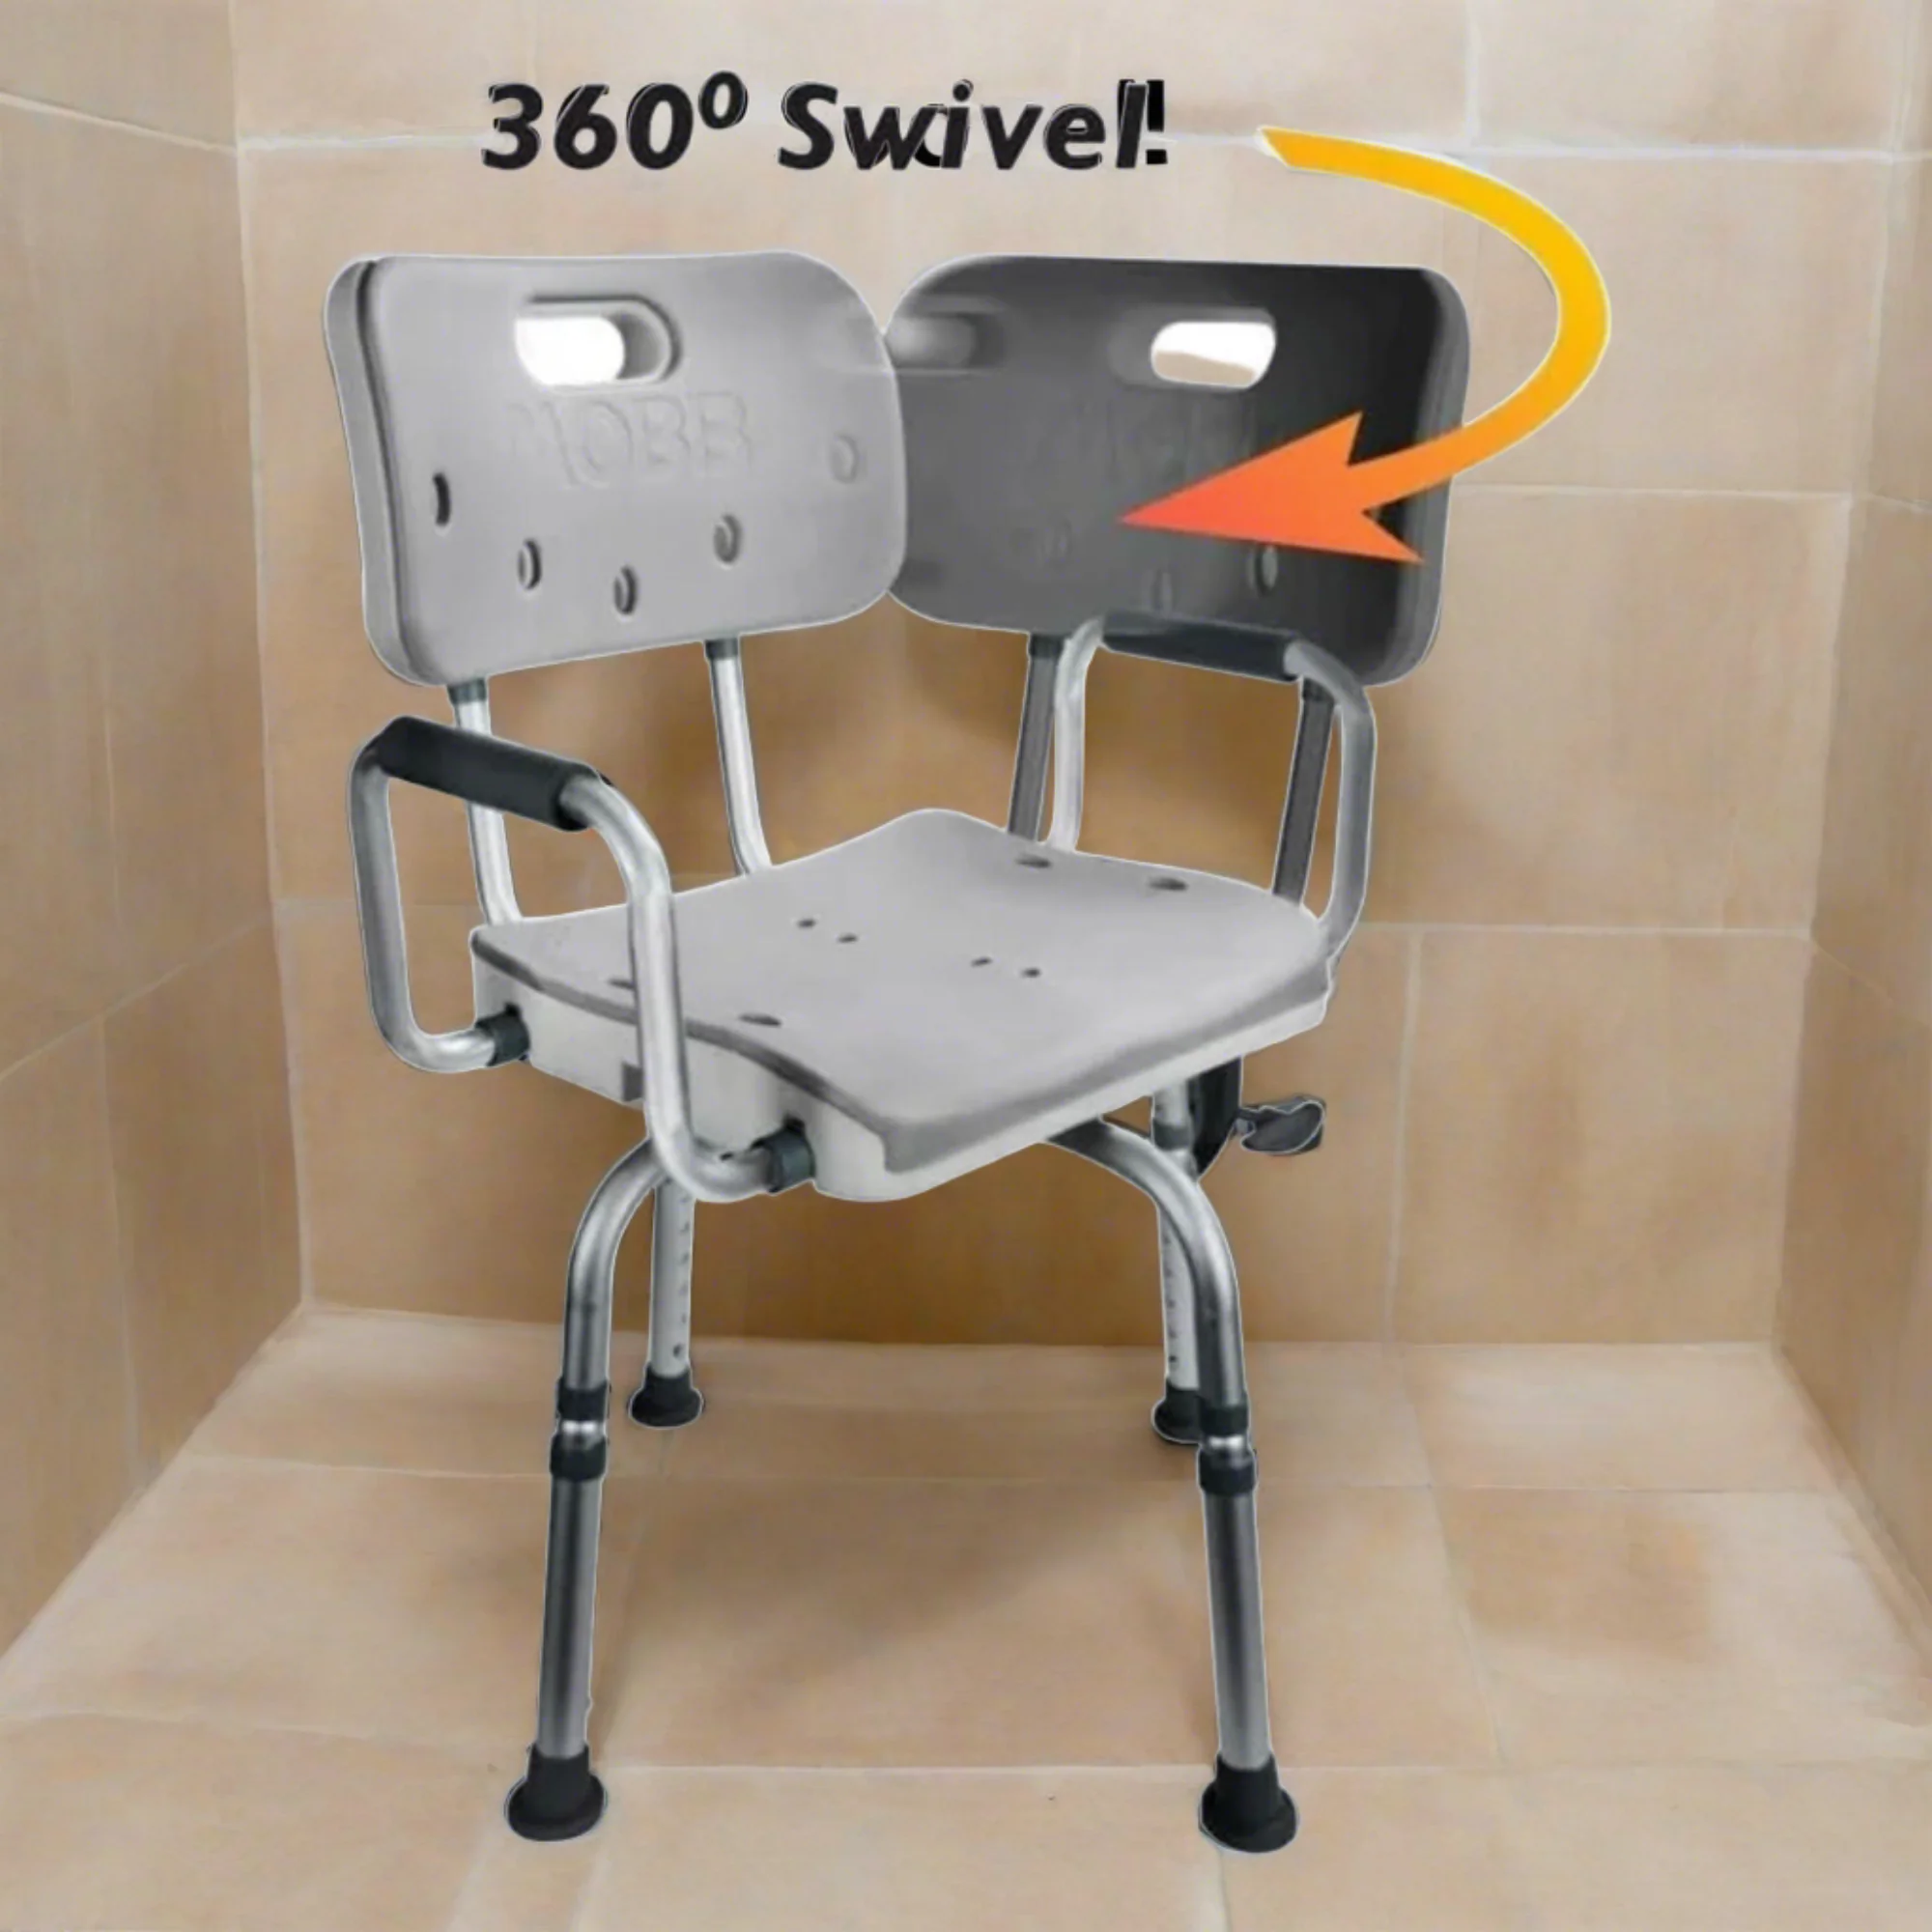 MOBB Swivel Shower Chair 3.0 - 360° Rotating Seat, Adjustable, 300 lbs Rustproof - Picture 3 of 12